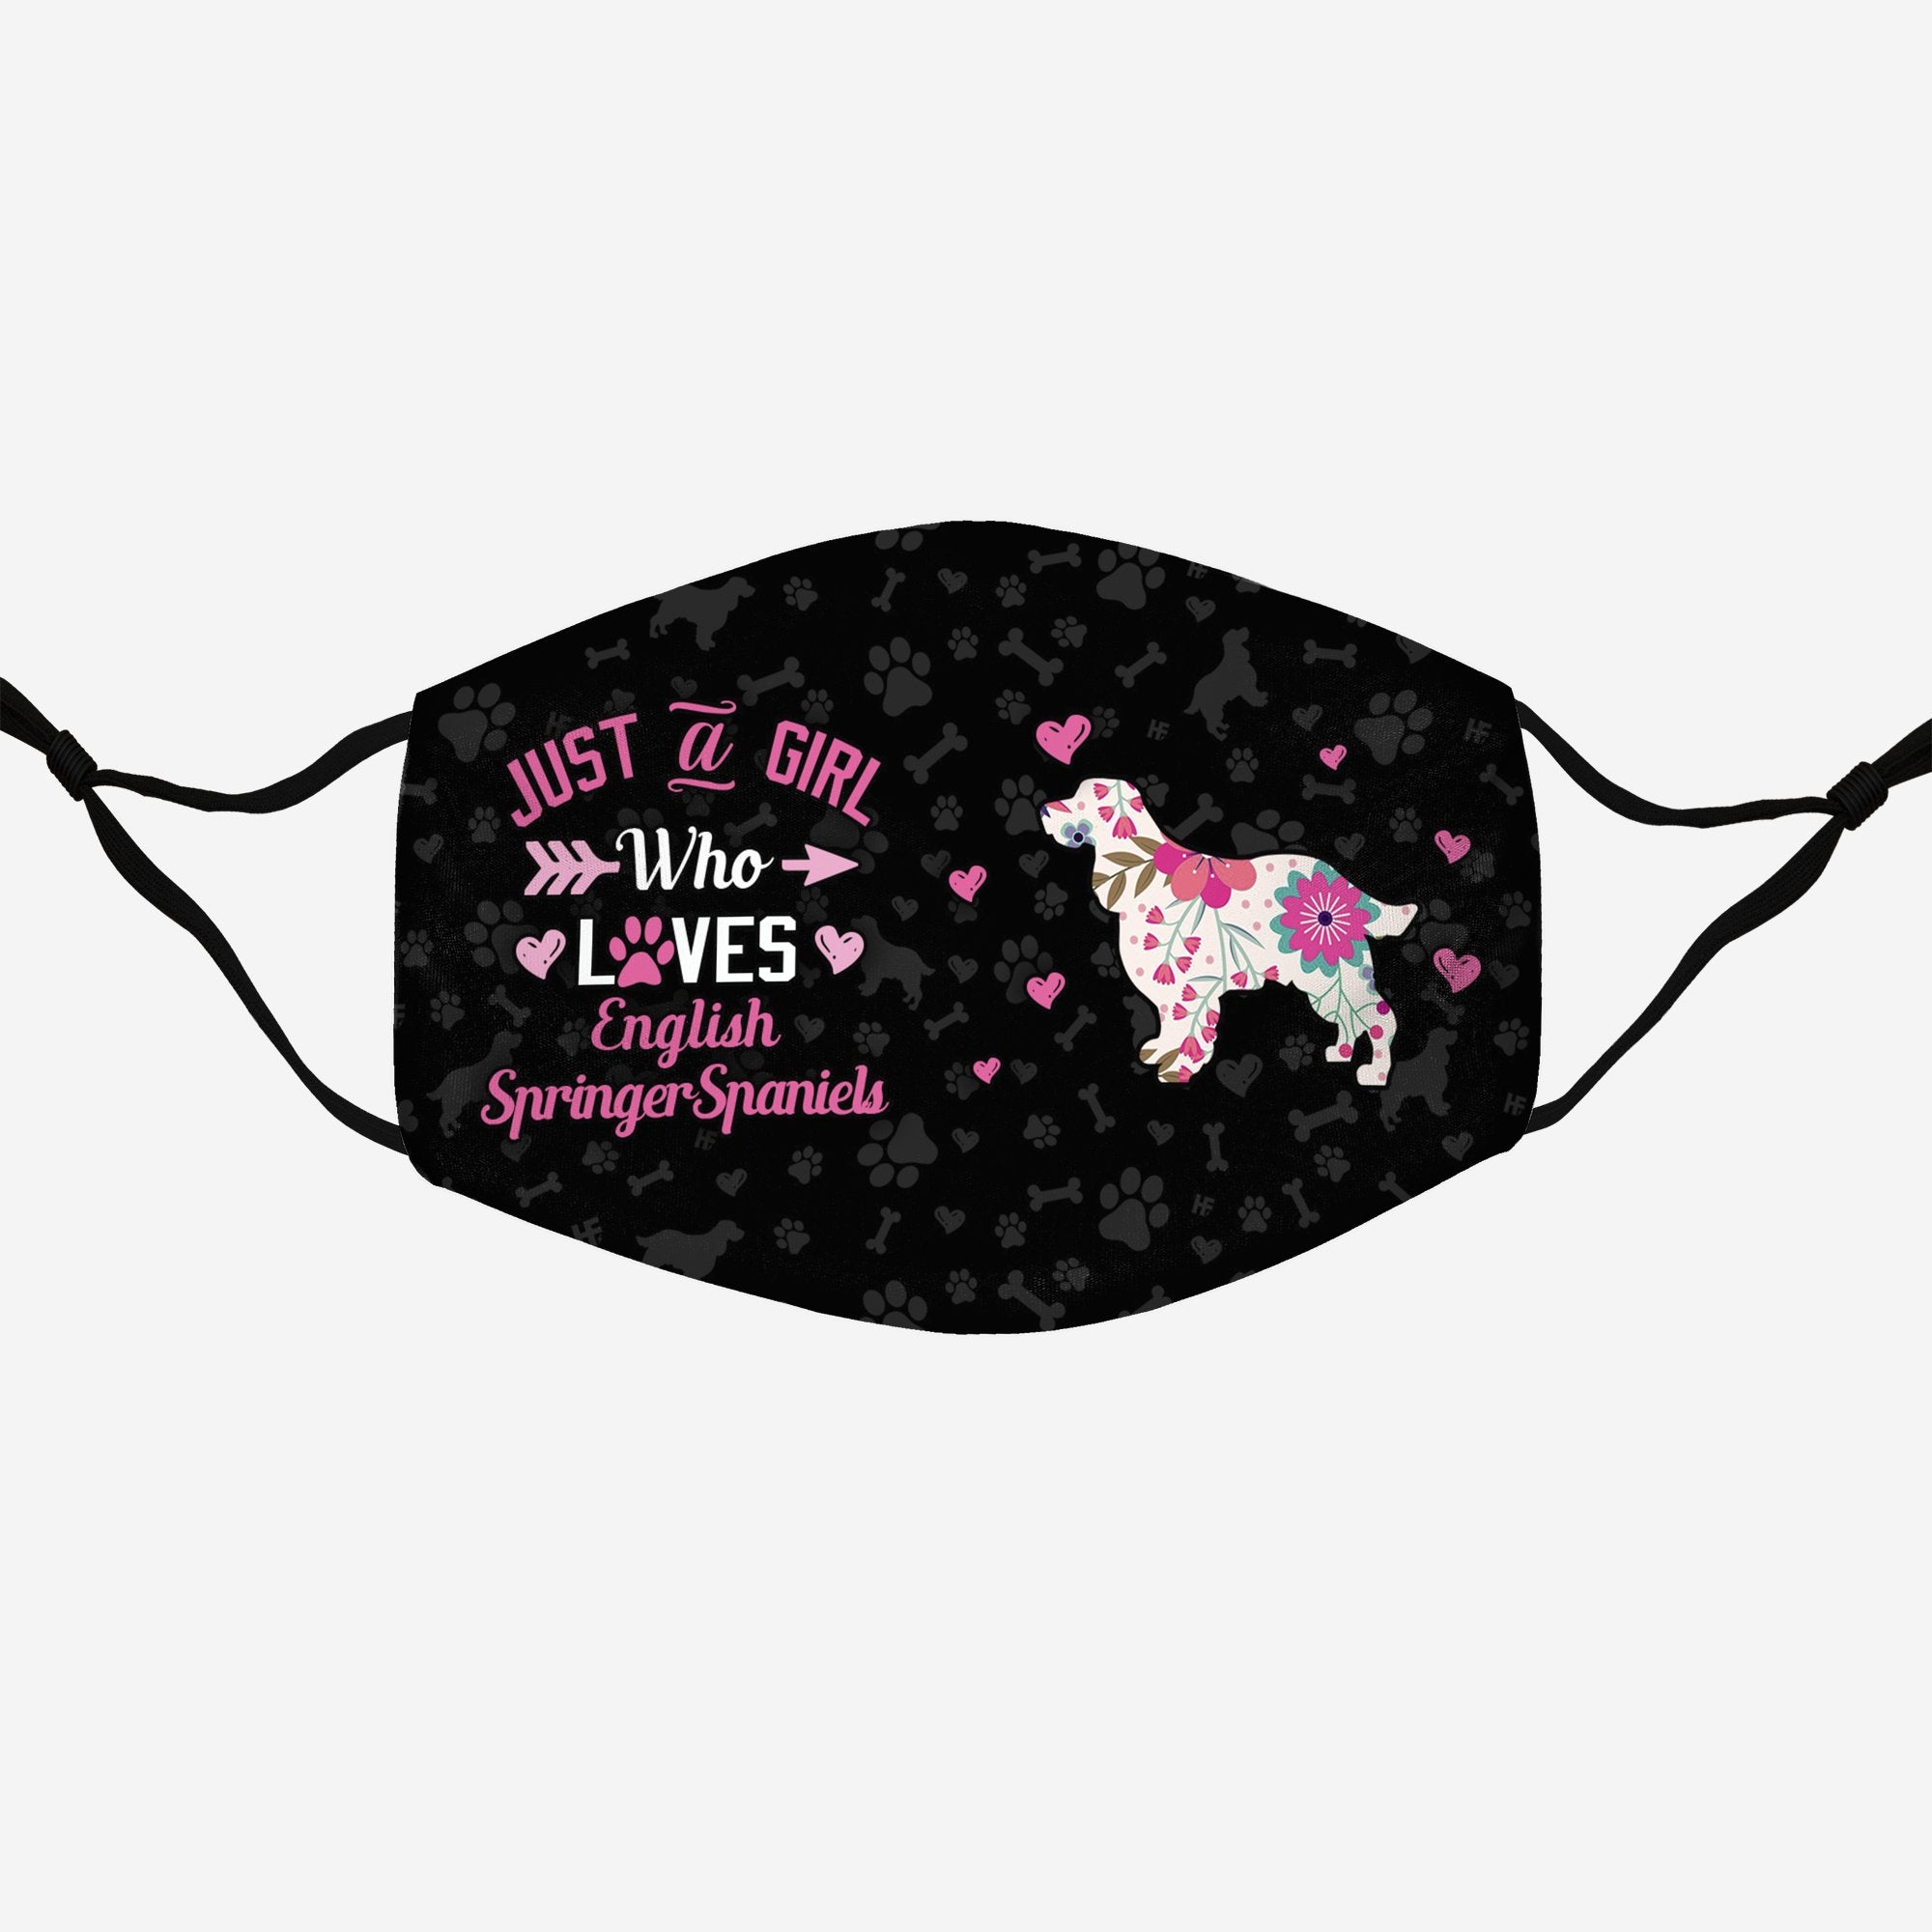 Just A Girl Who Loves English Springer Spaniels EZ07 3107 Face Mask